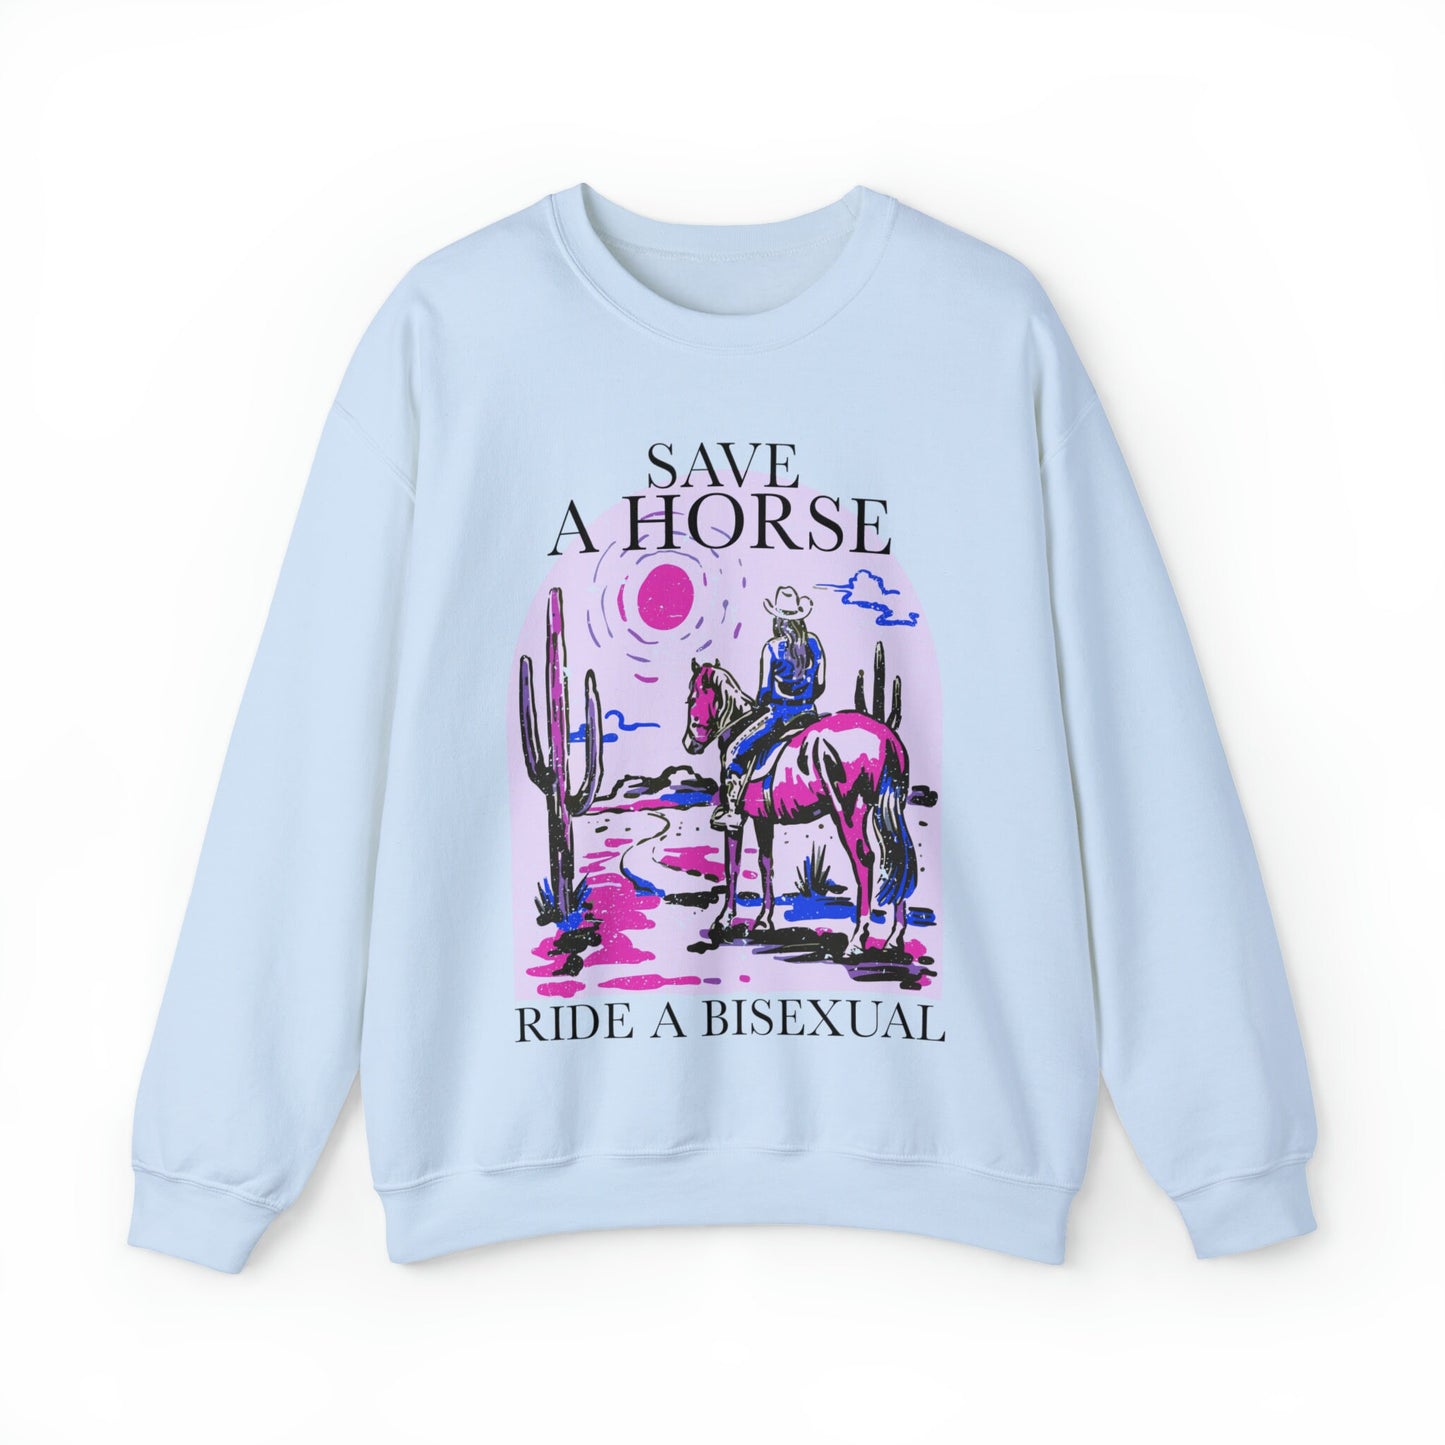 Save a horse ride a bisexual sweatshirt